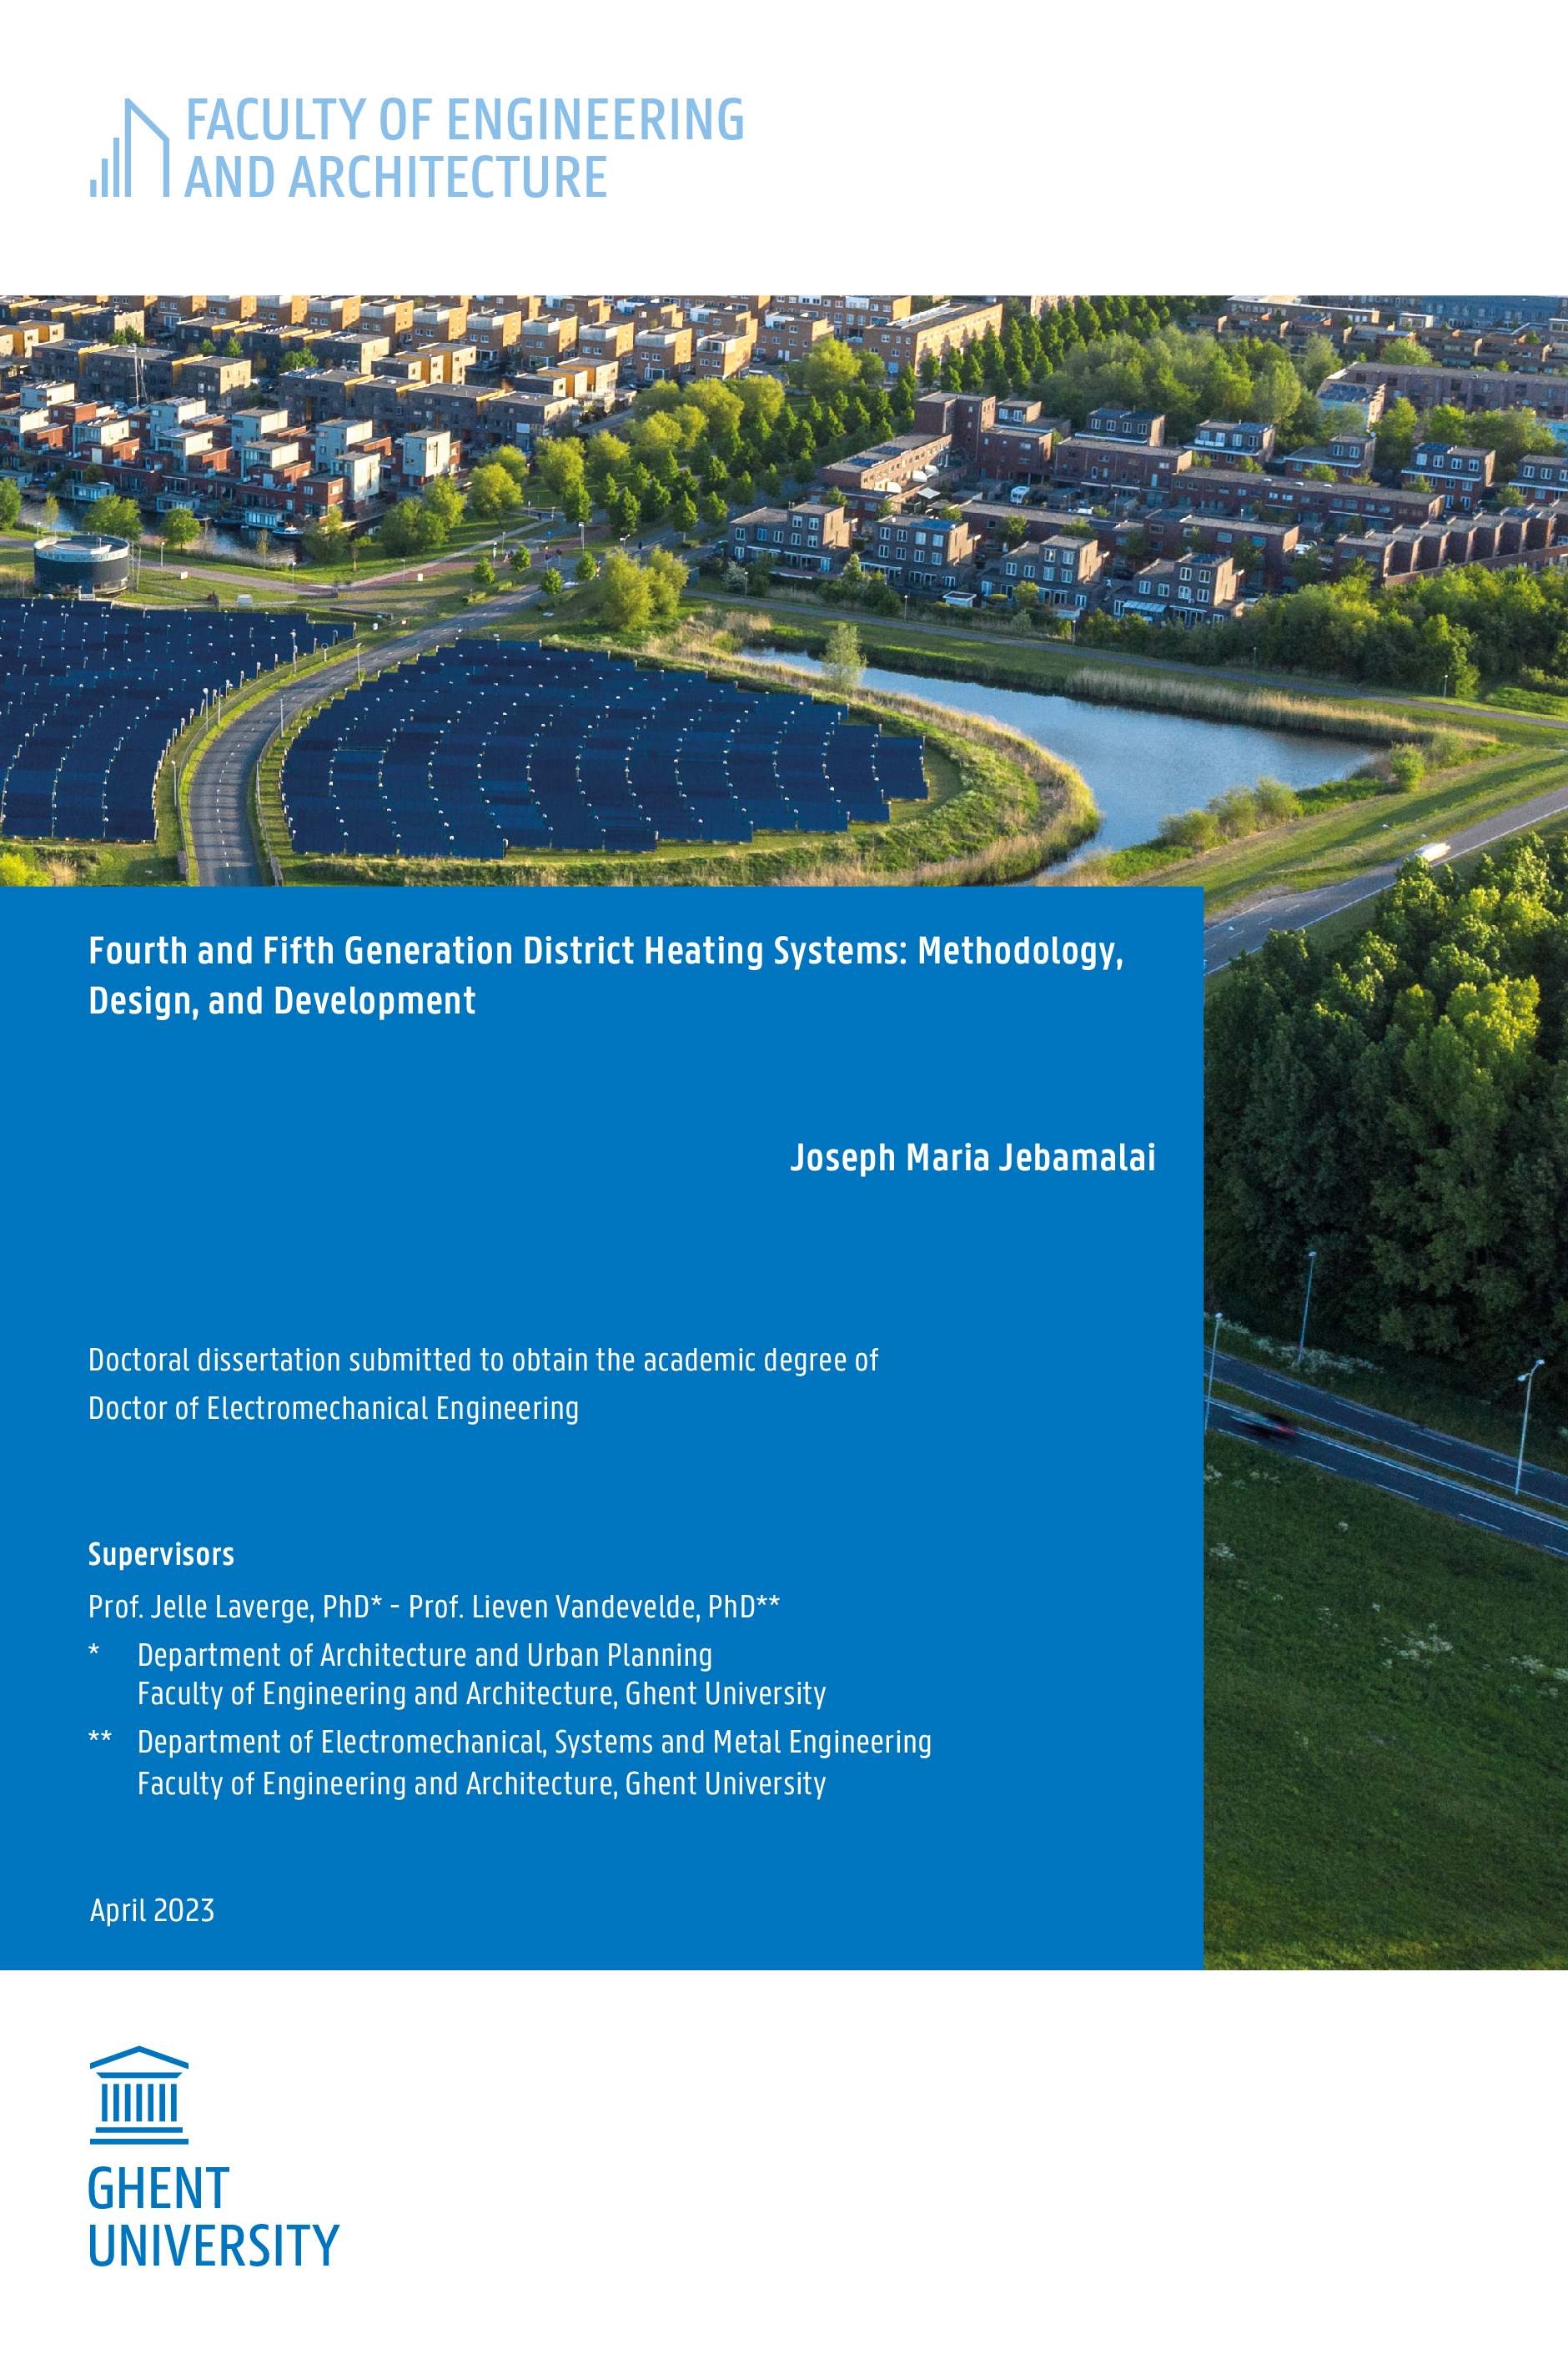 Fourth and Fifth Generation District Heating Systems: Methodology, Design, and Development